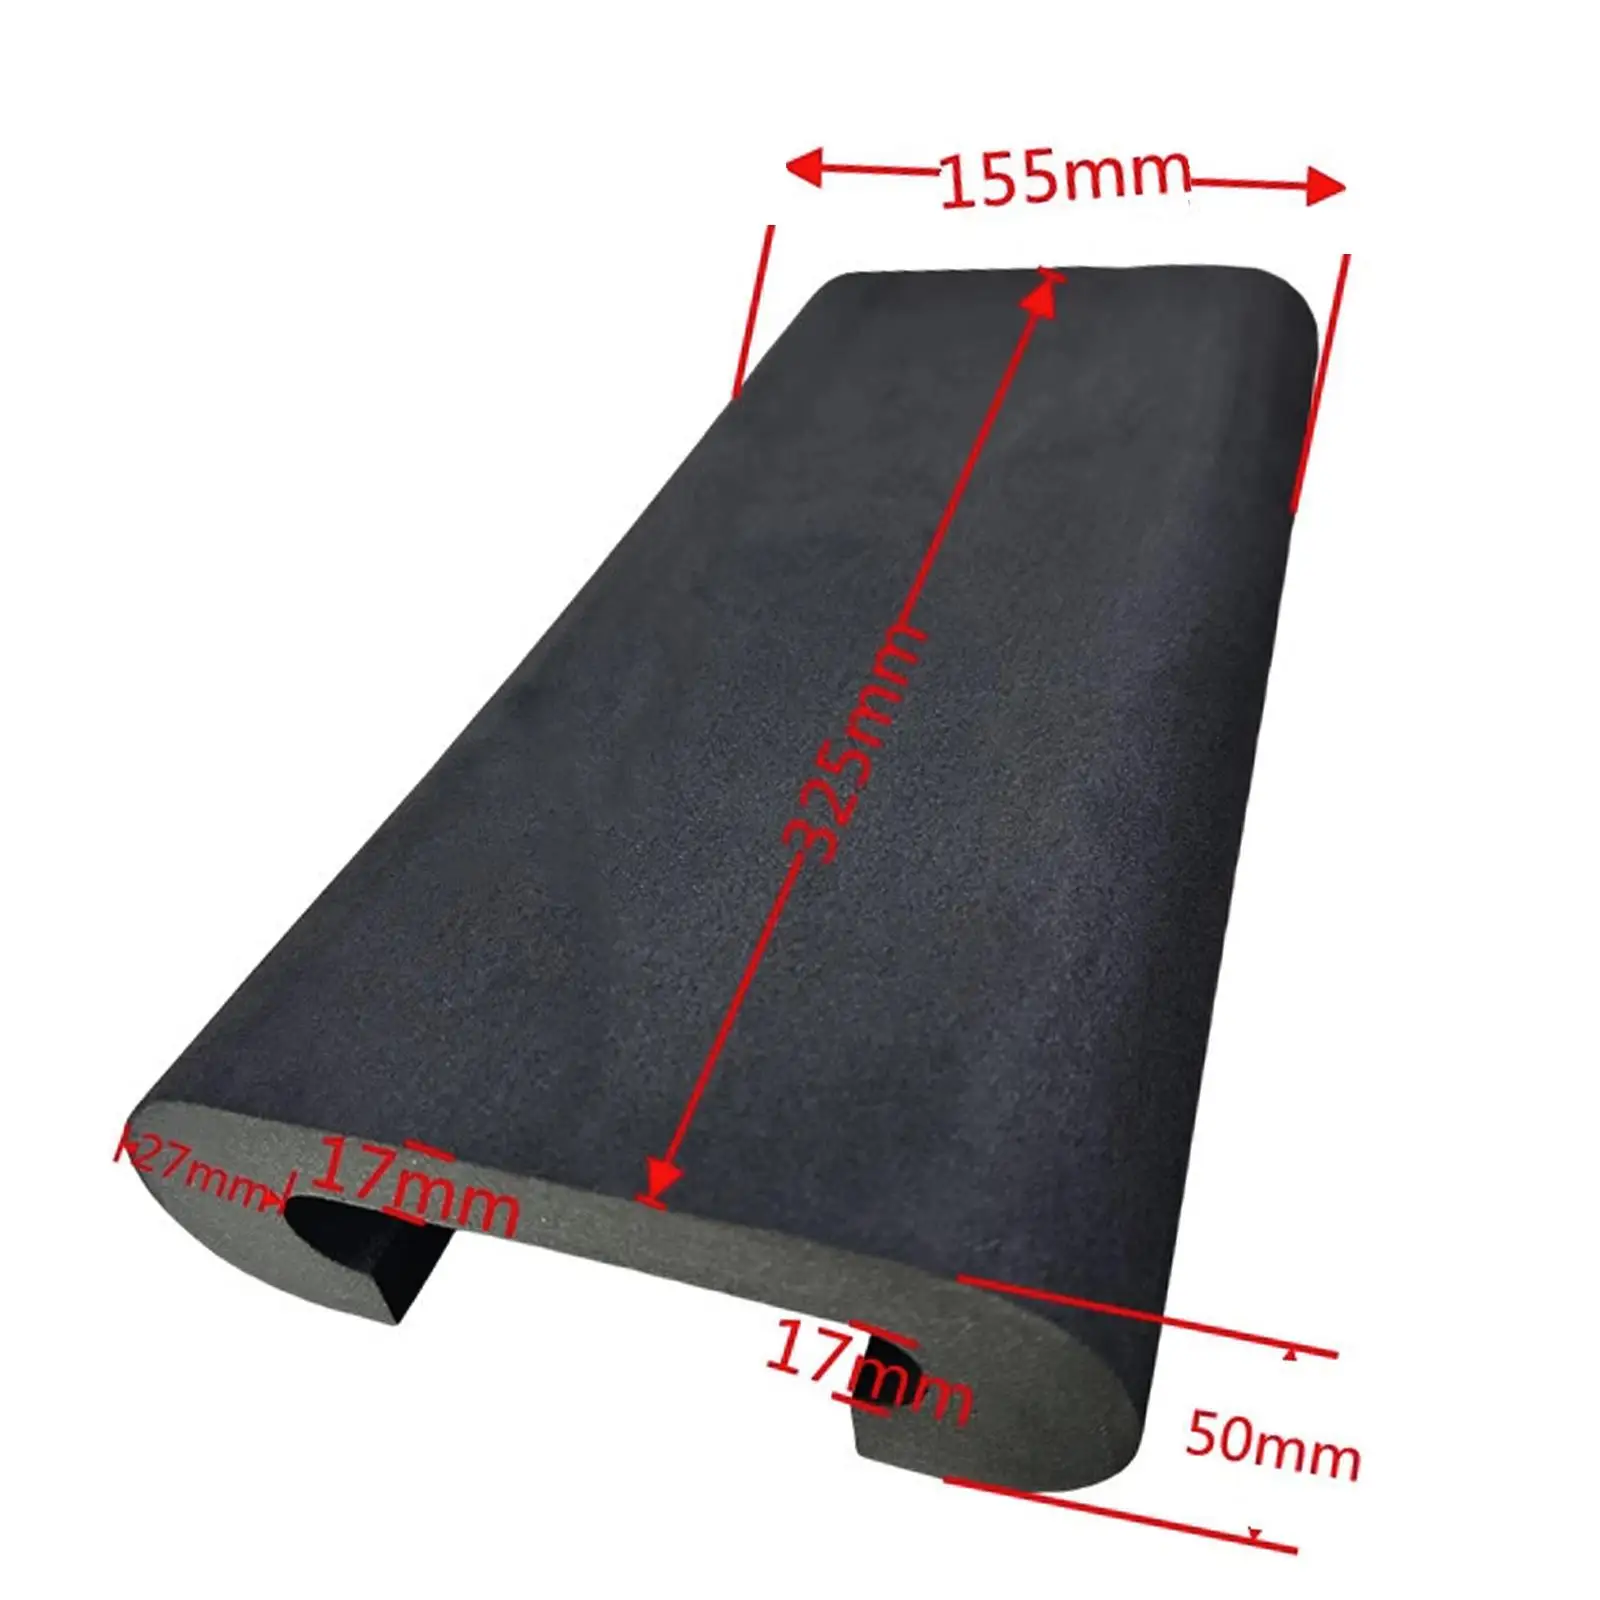 Dragon Boat Seat Boat Cushion Seat Dragon Boat Saddle for Competition Water Rowing Machines Rower Boat Kayak Kite Boat Training